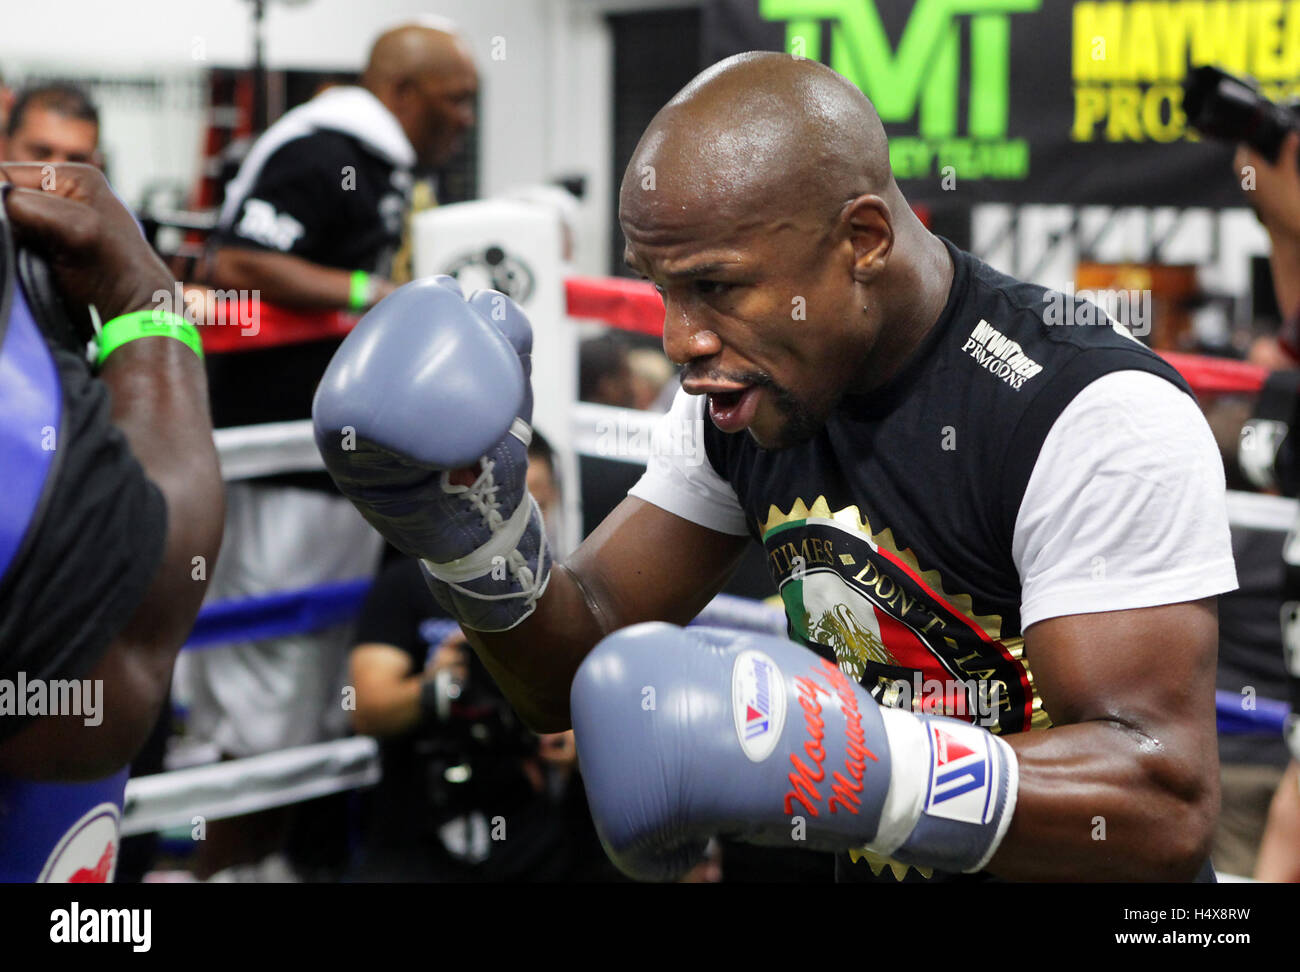 Pin by victor rodrigo on Boxeo  Floyd mayweather, Fight night boxing,  Boxing champions